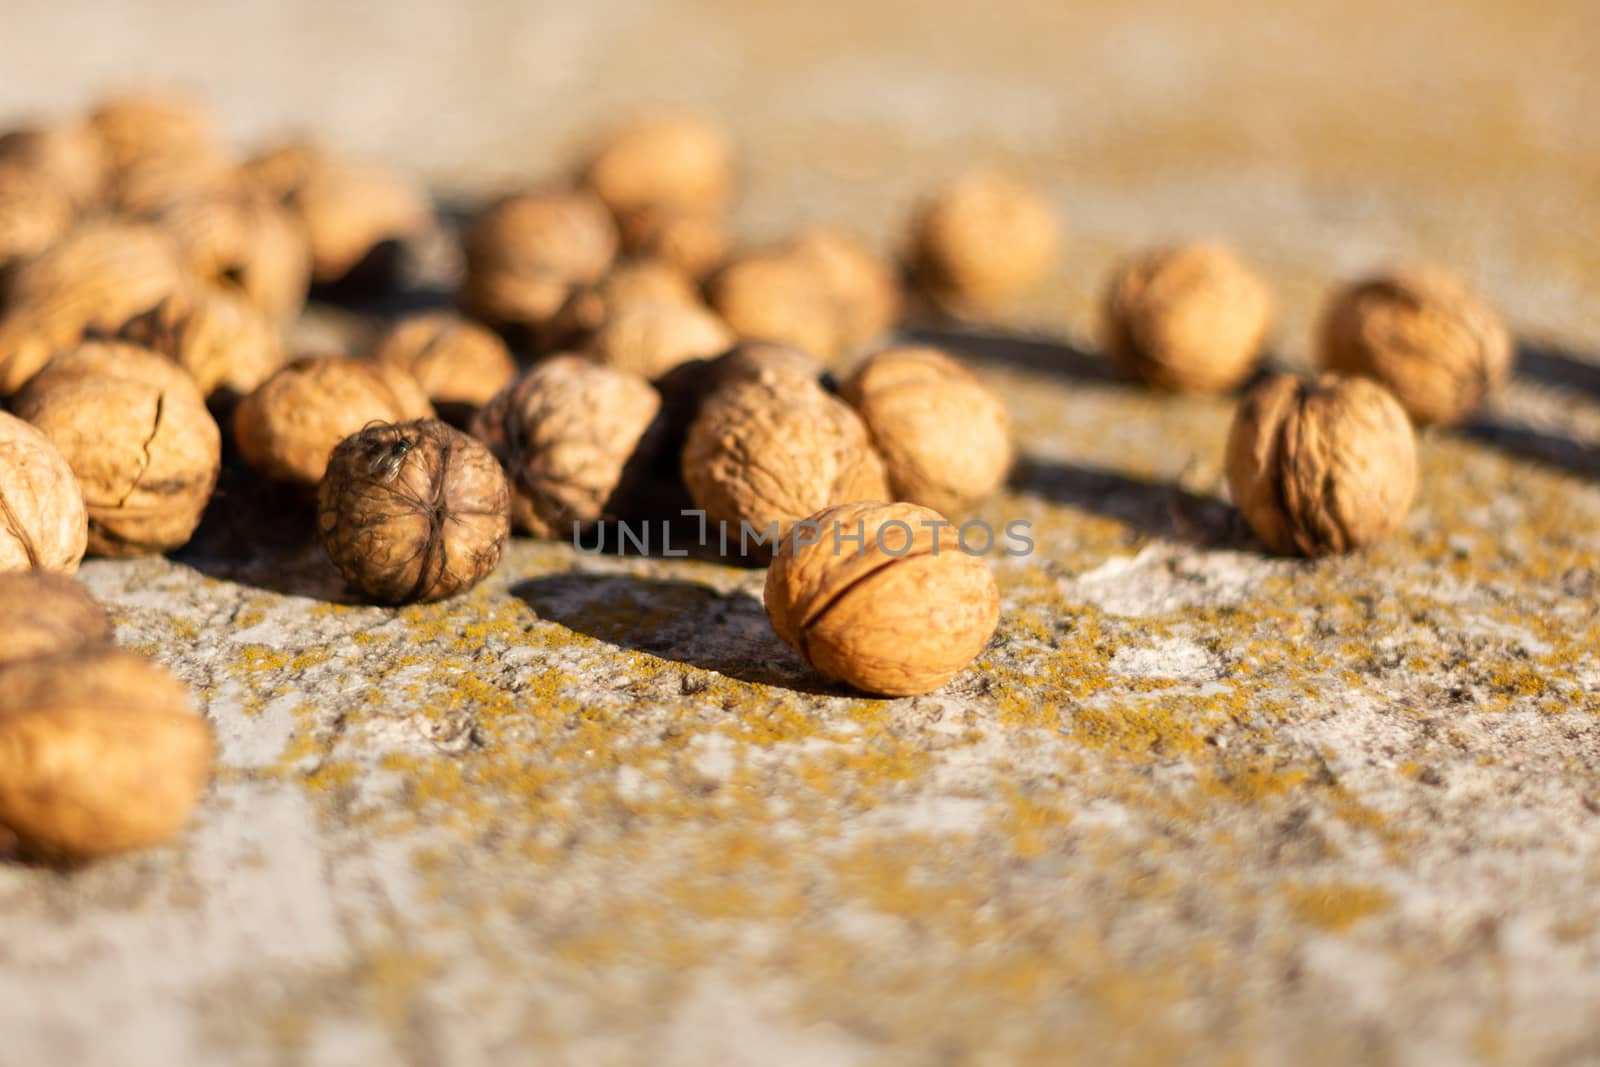 Ripe walnuts on concrete foundation with dry green moss and blurred background.